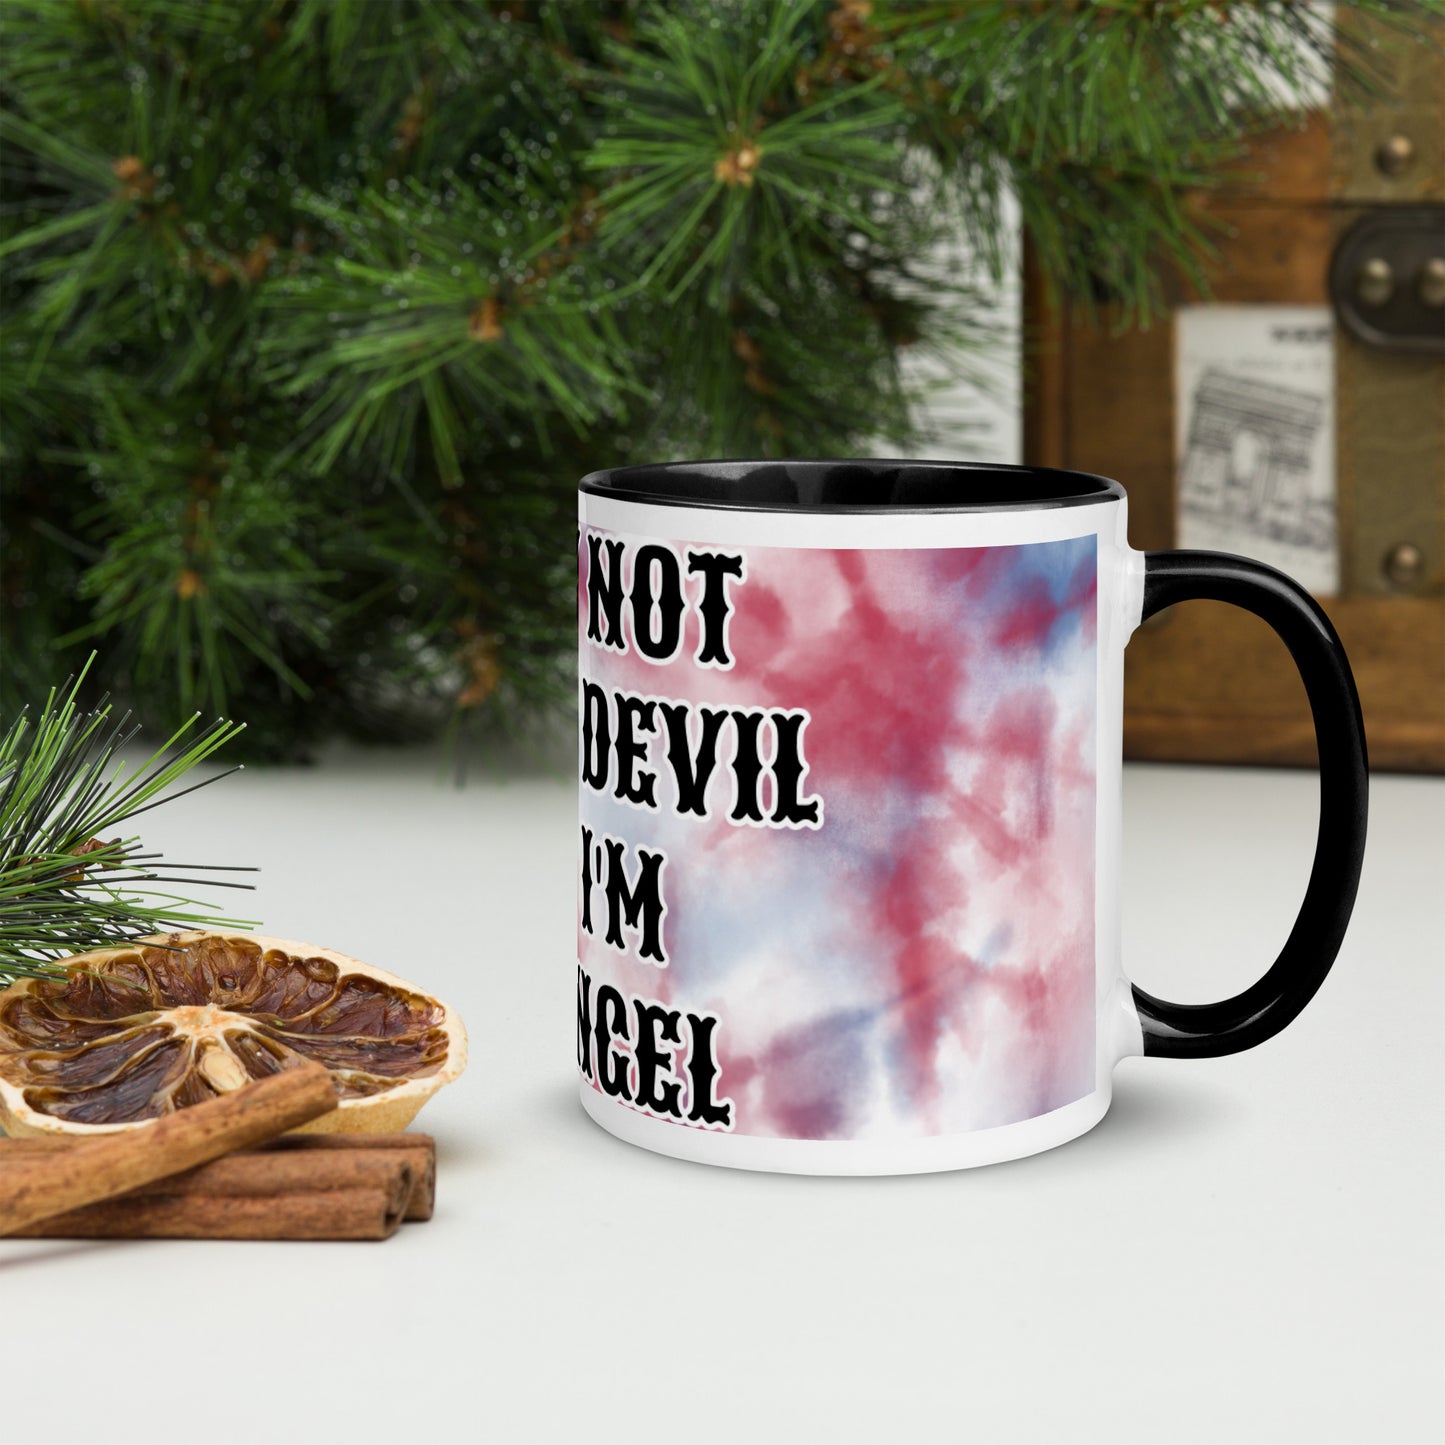 I MAY NOT BE THE DEVIL BUT I'M NO ANGEL- Mug with Color Inside